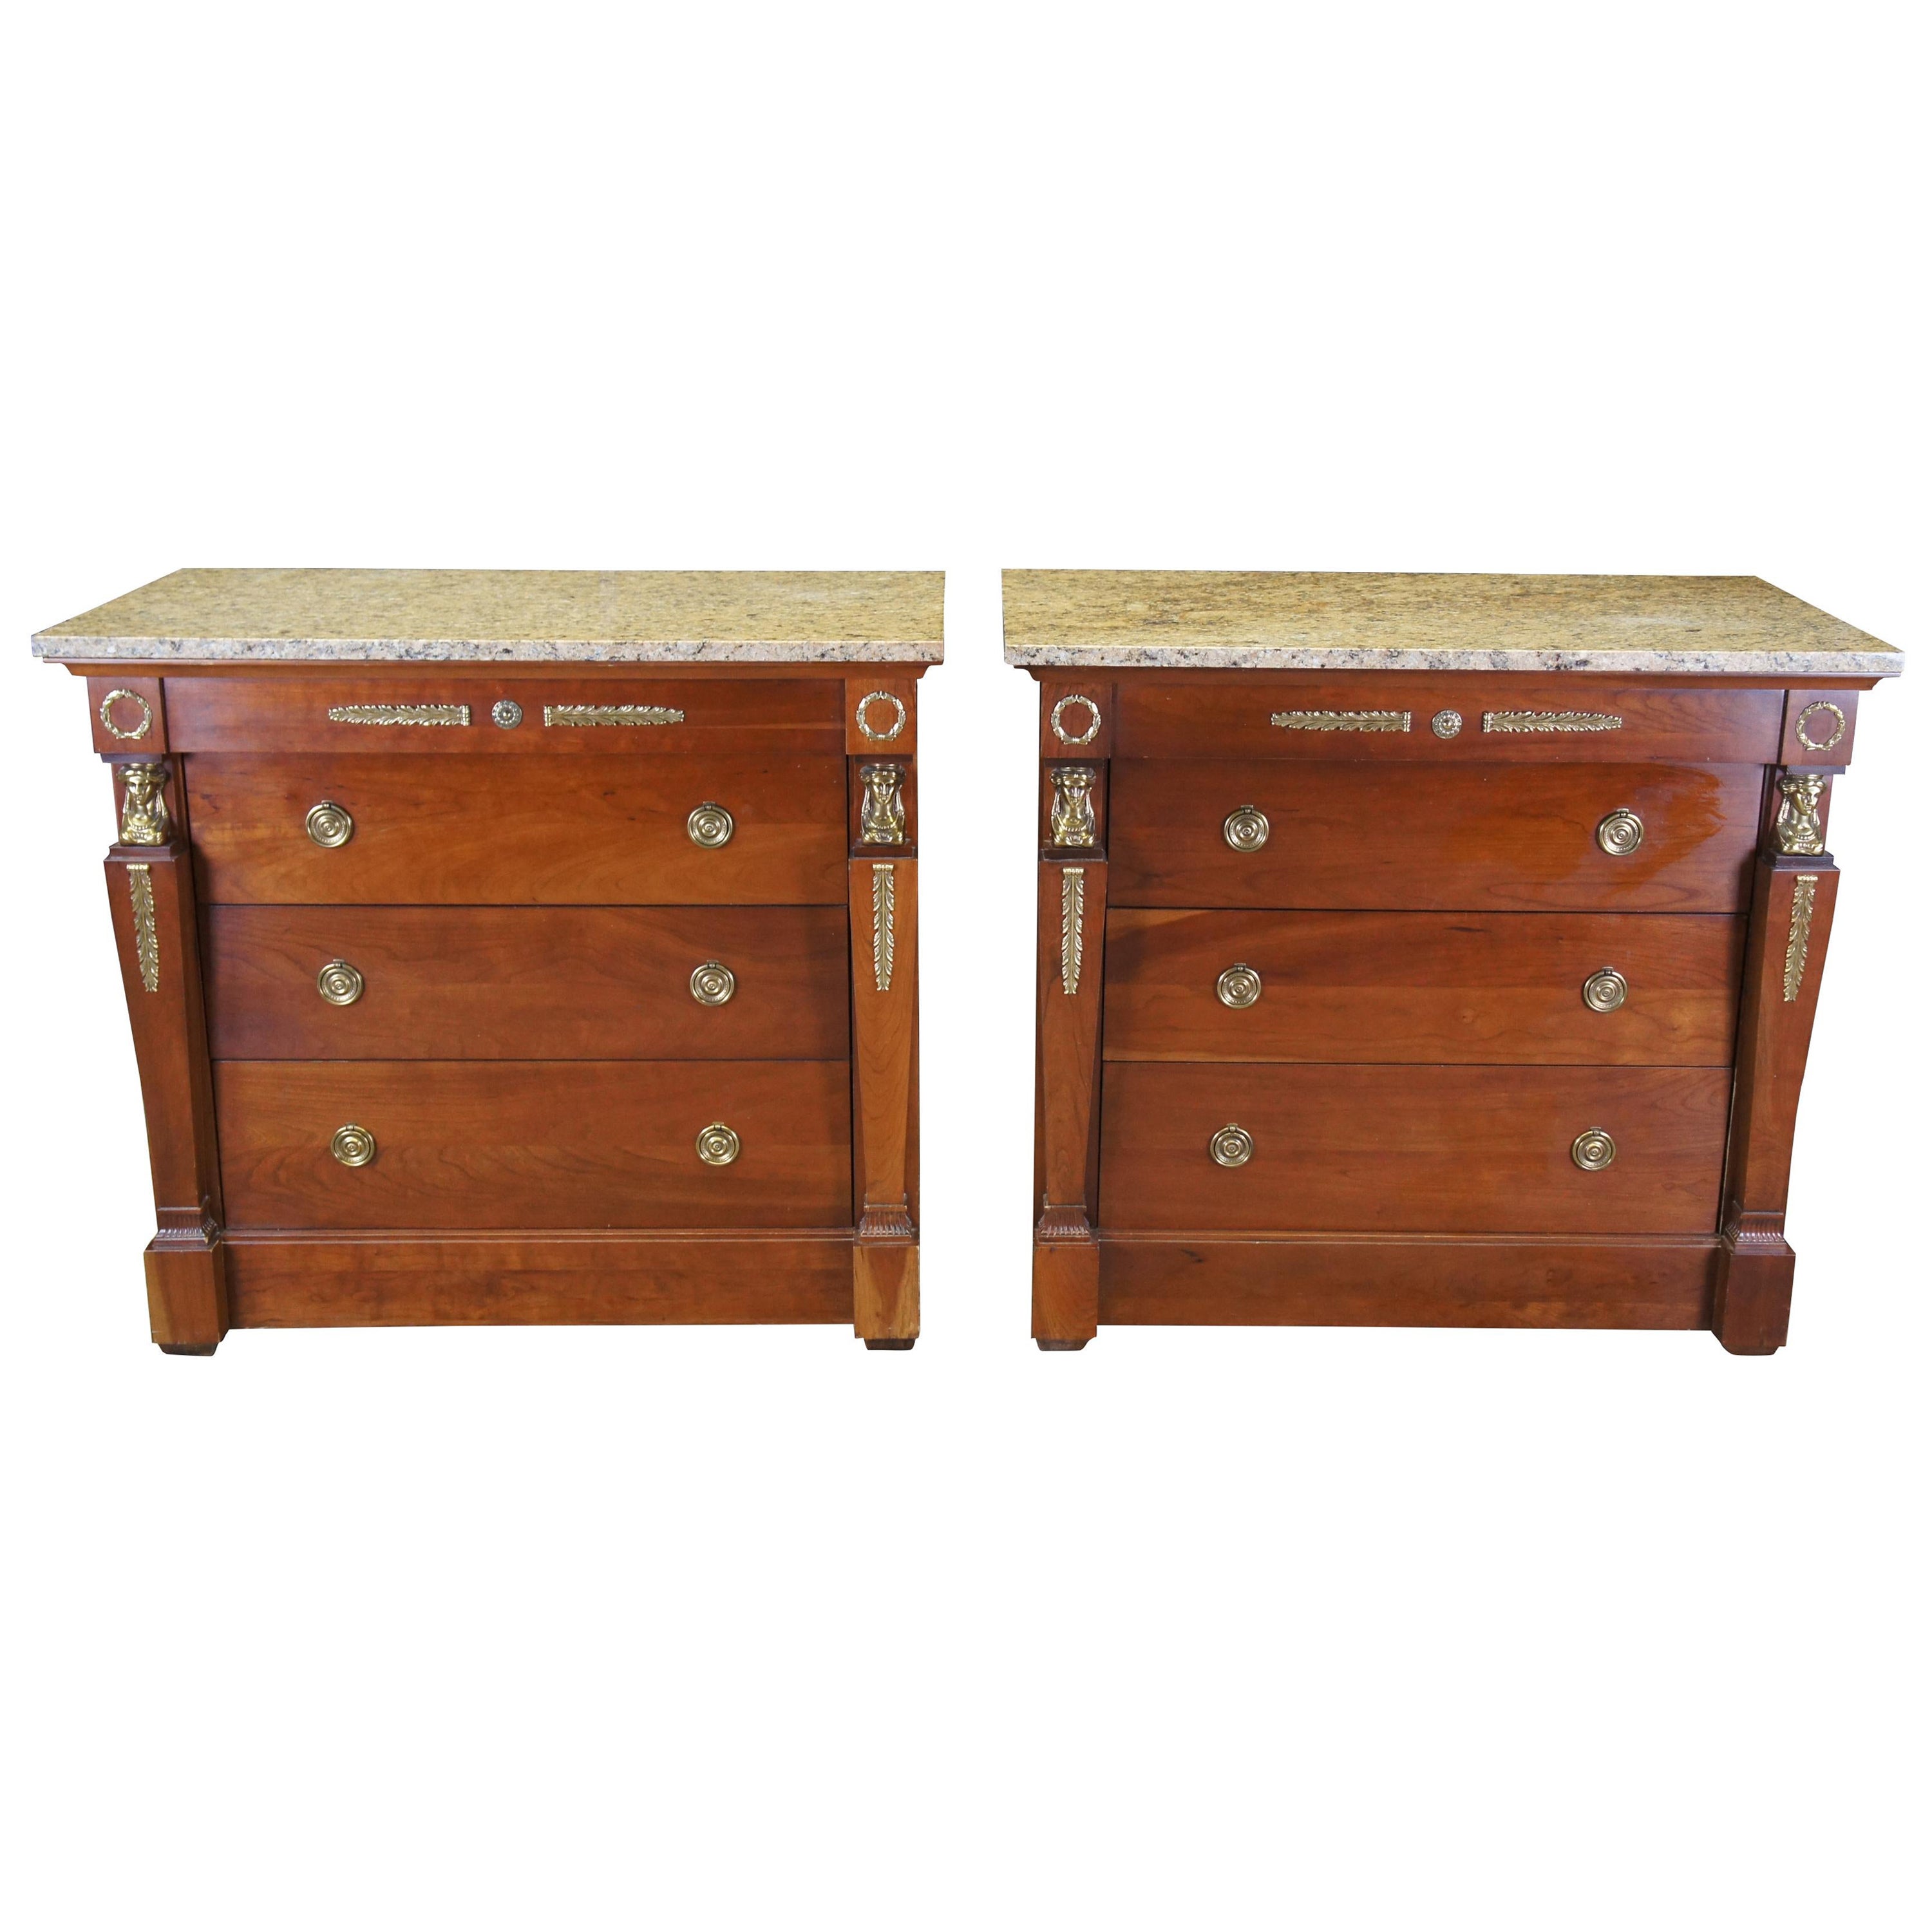 2 Harden French Empire Egyptian Revival Cherry Marble Nightstands Commodes Chest For Sale